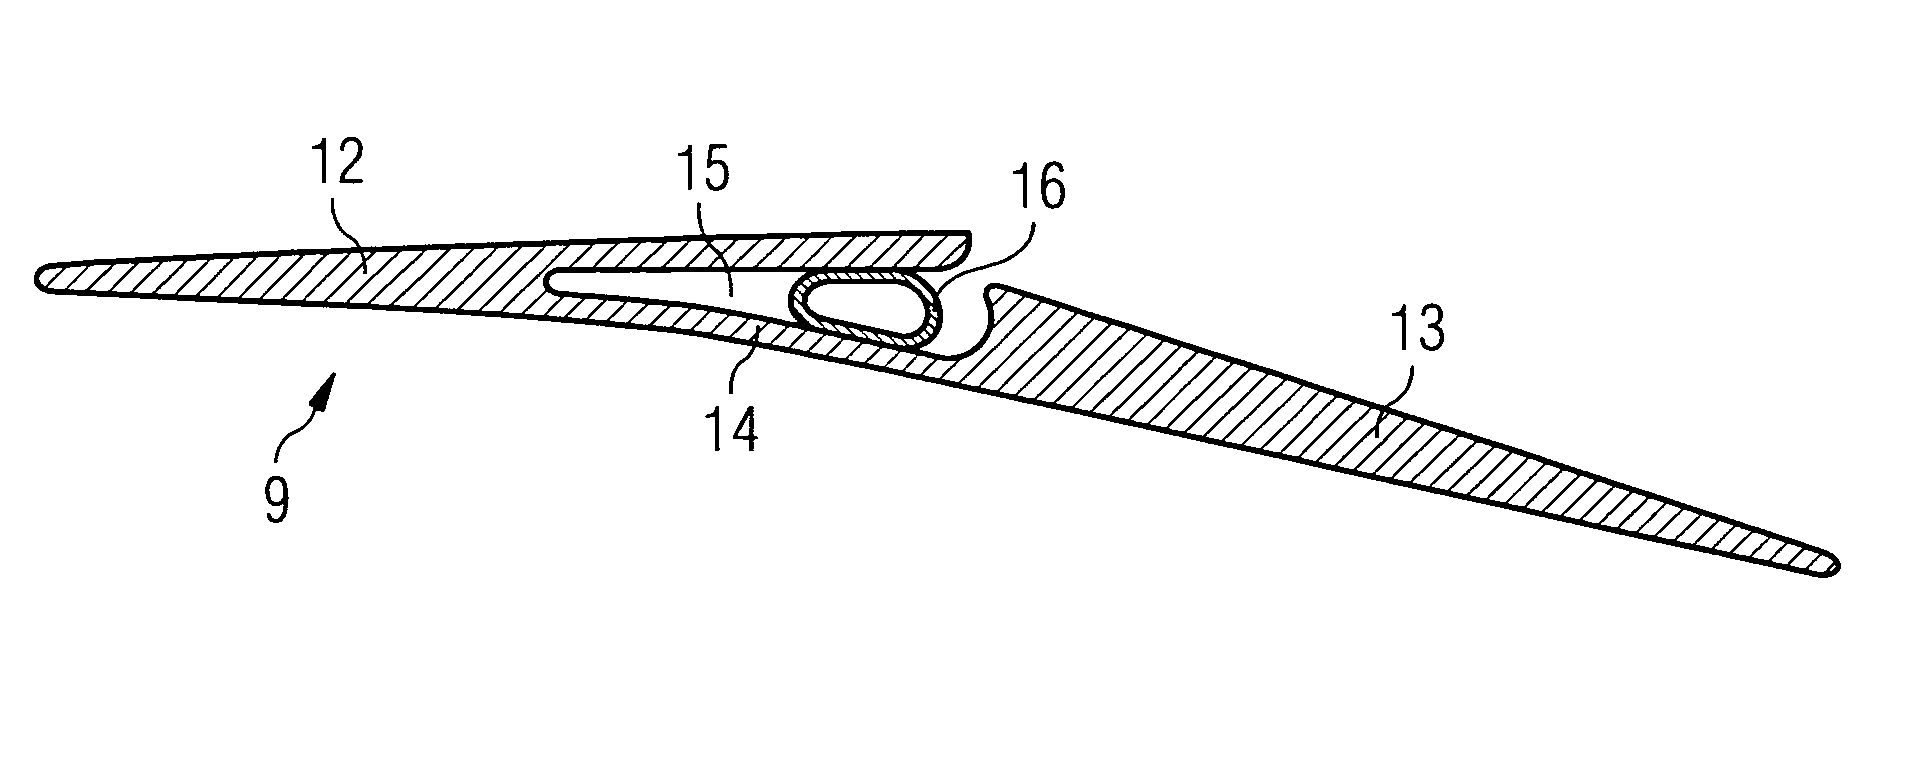 Actuation system for a wind turbine blade flap